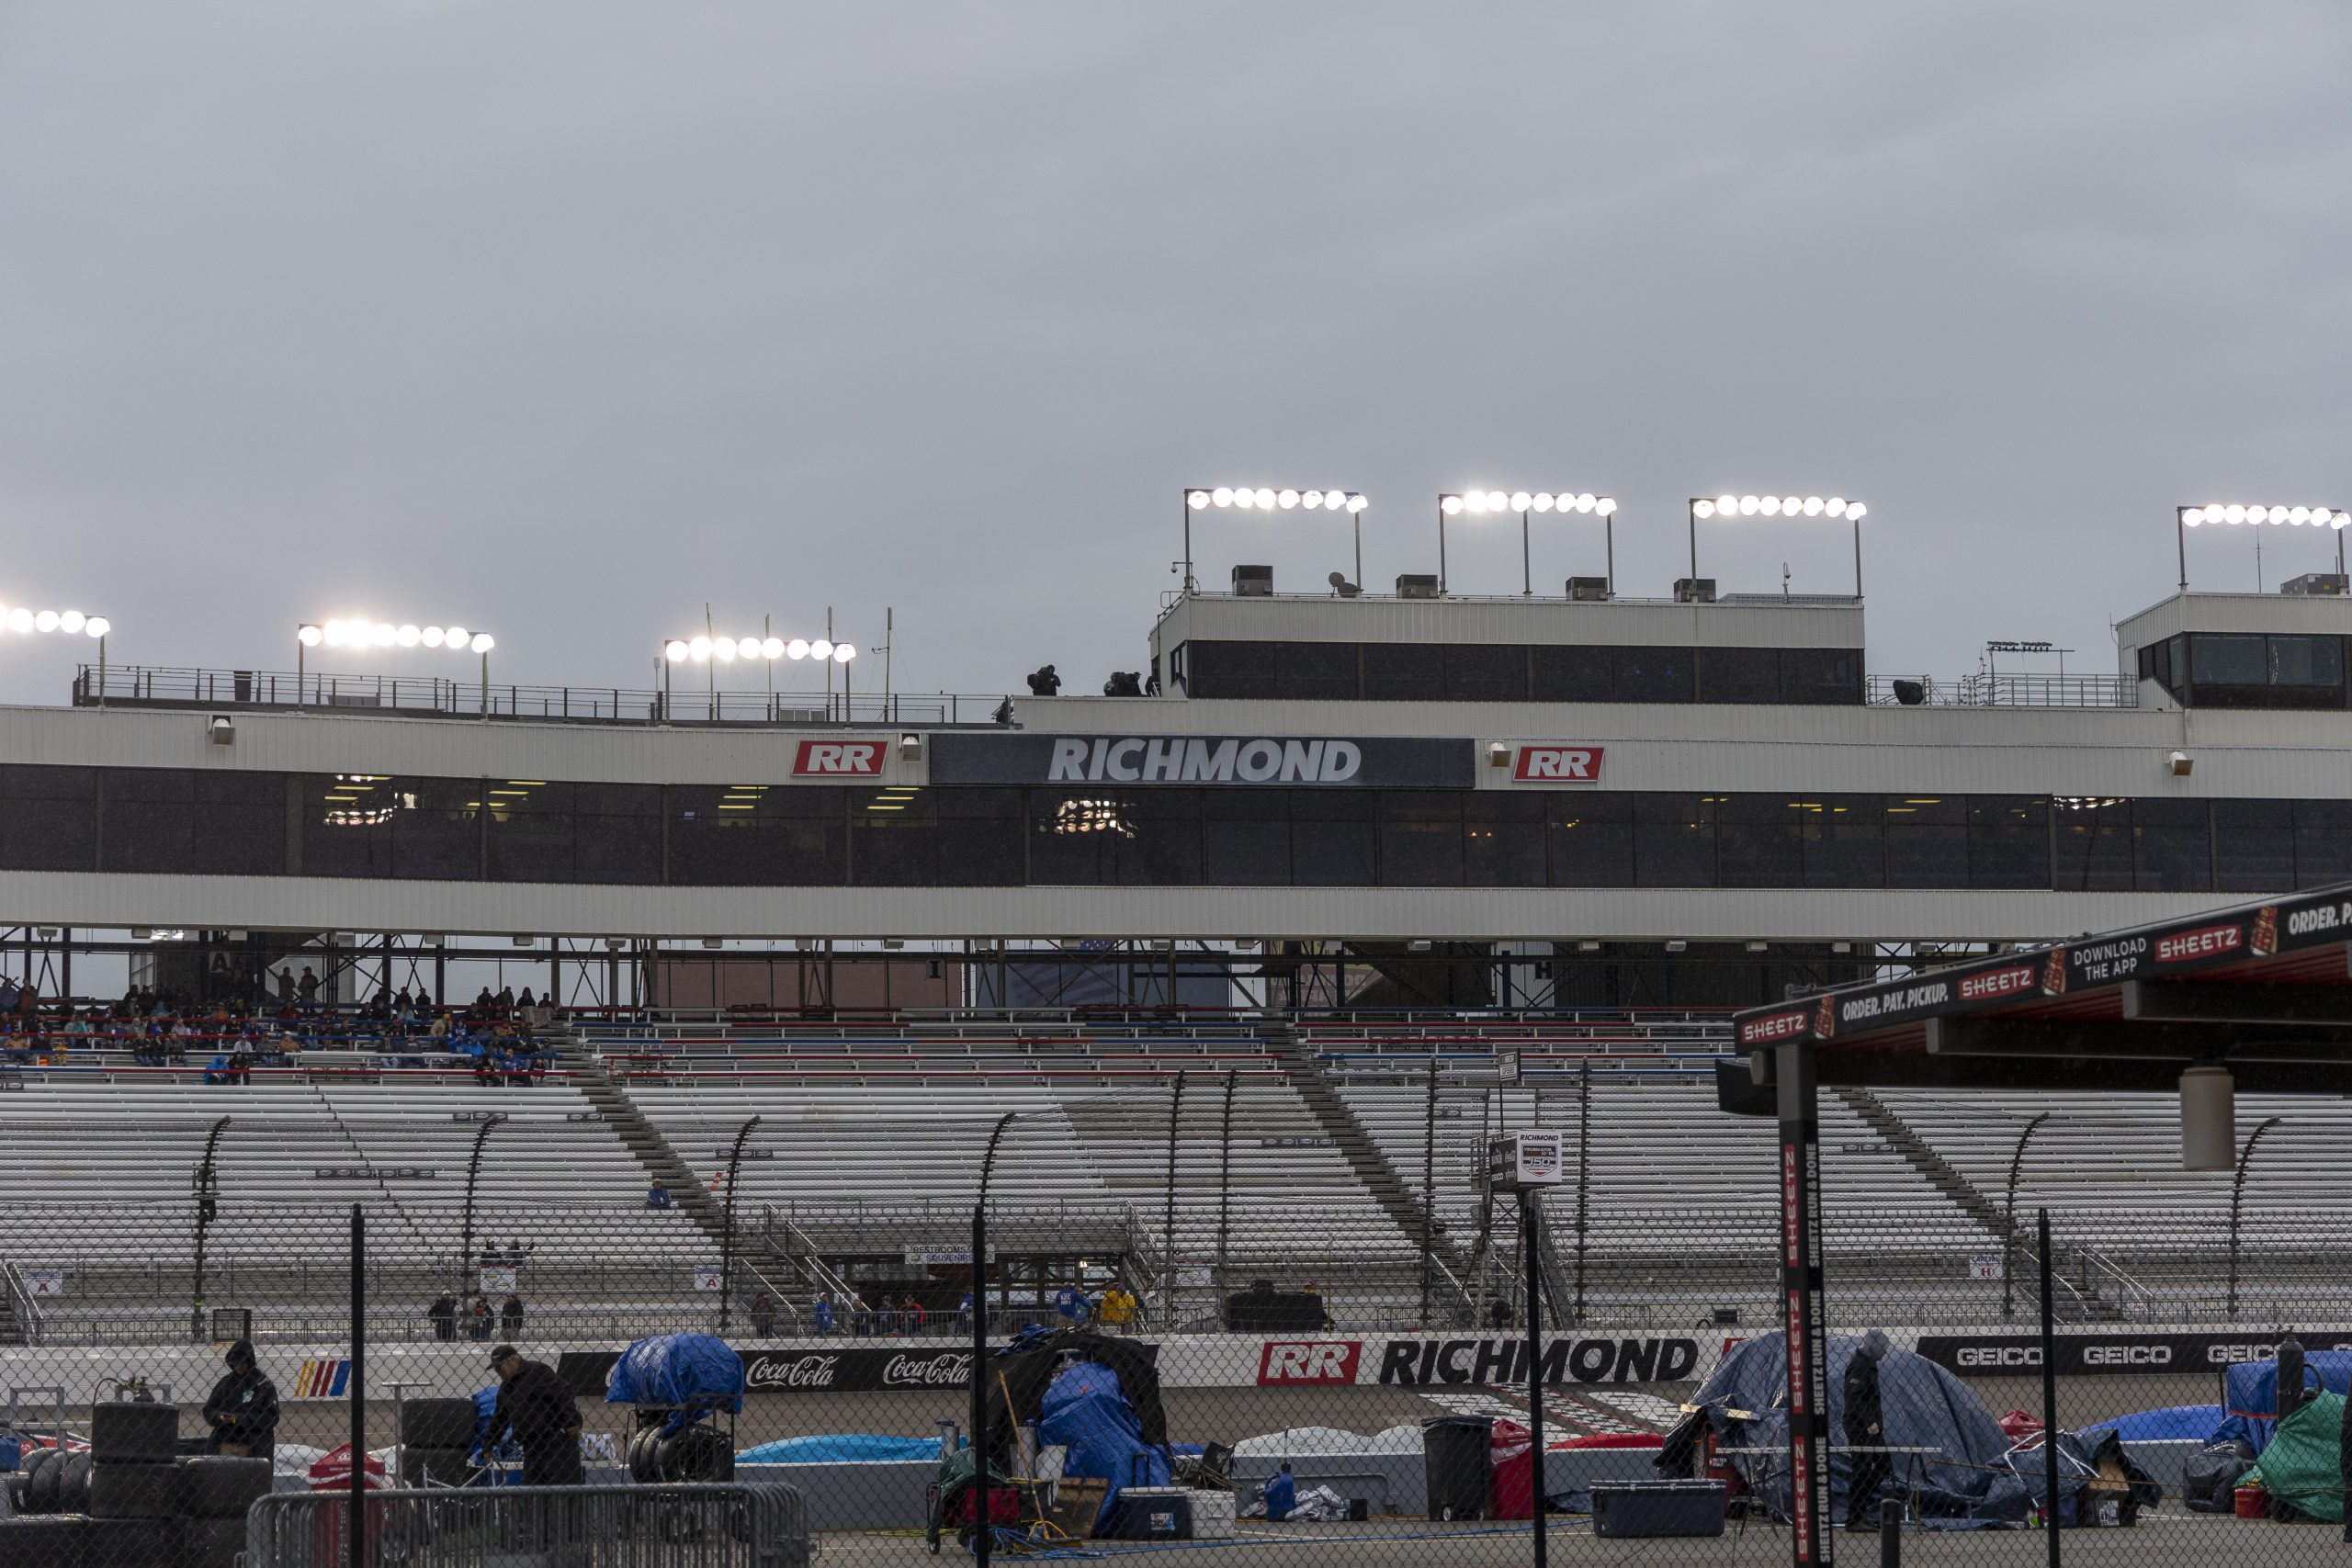 It will be a bright, bright sunshiny race day for Sunday's Toyota Owners 400 at Richmond Raceway. (Photo: Mitchell Richtmyre | The Podium Finish)